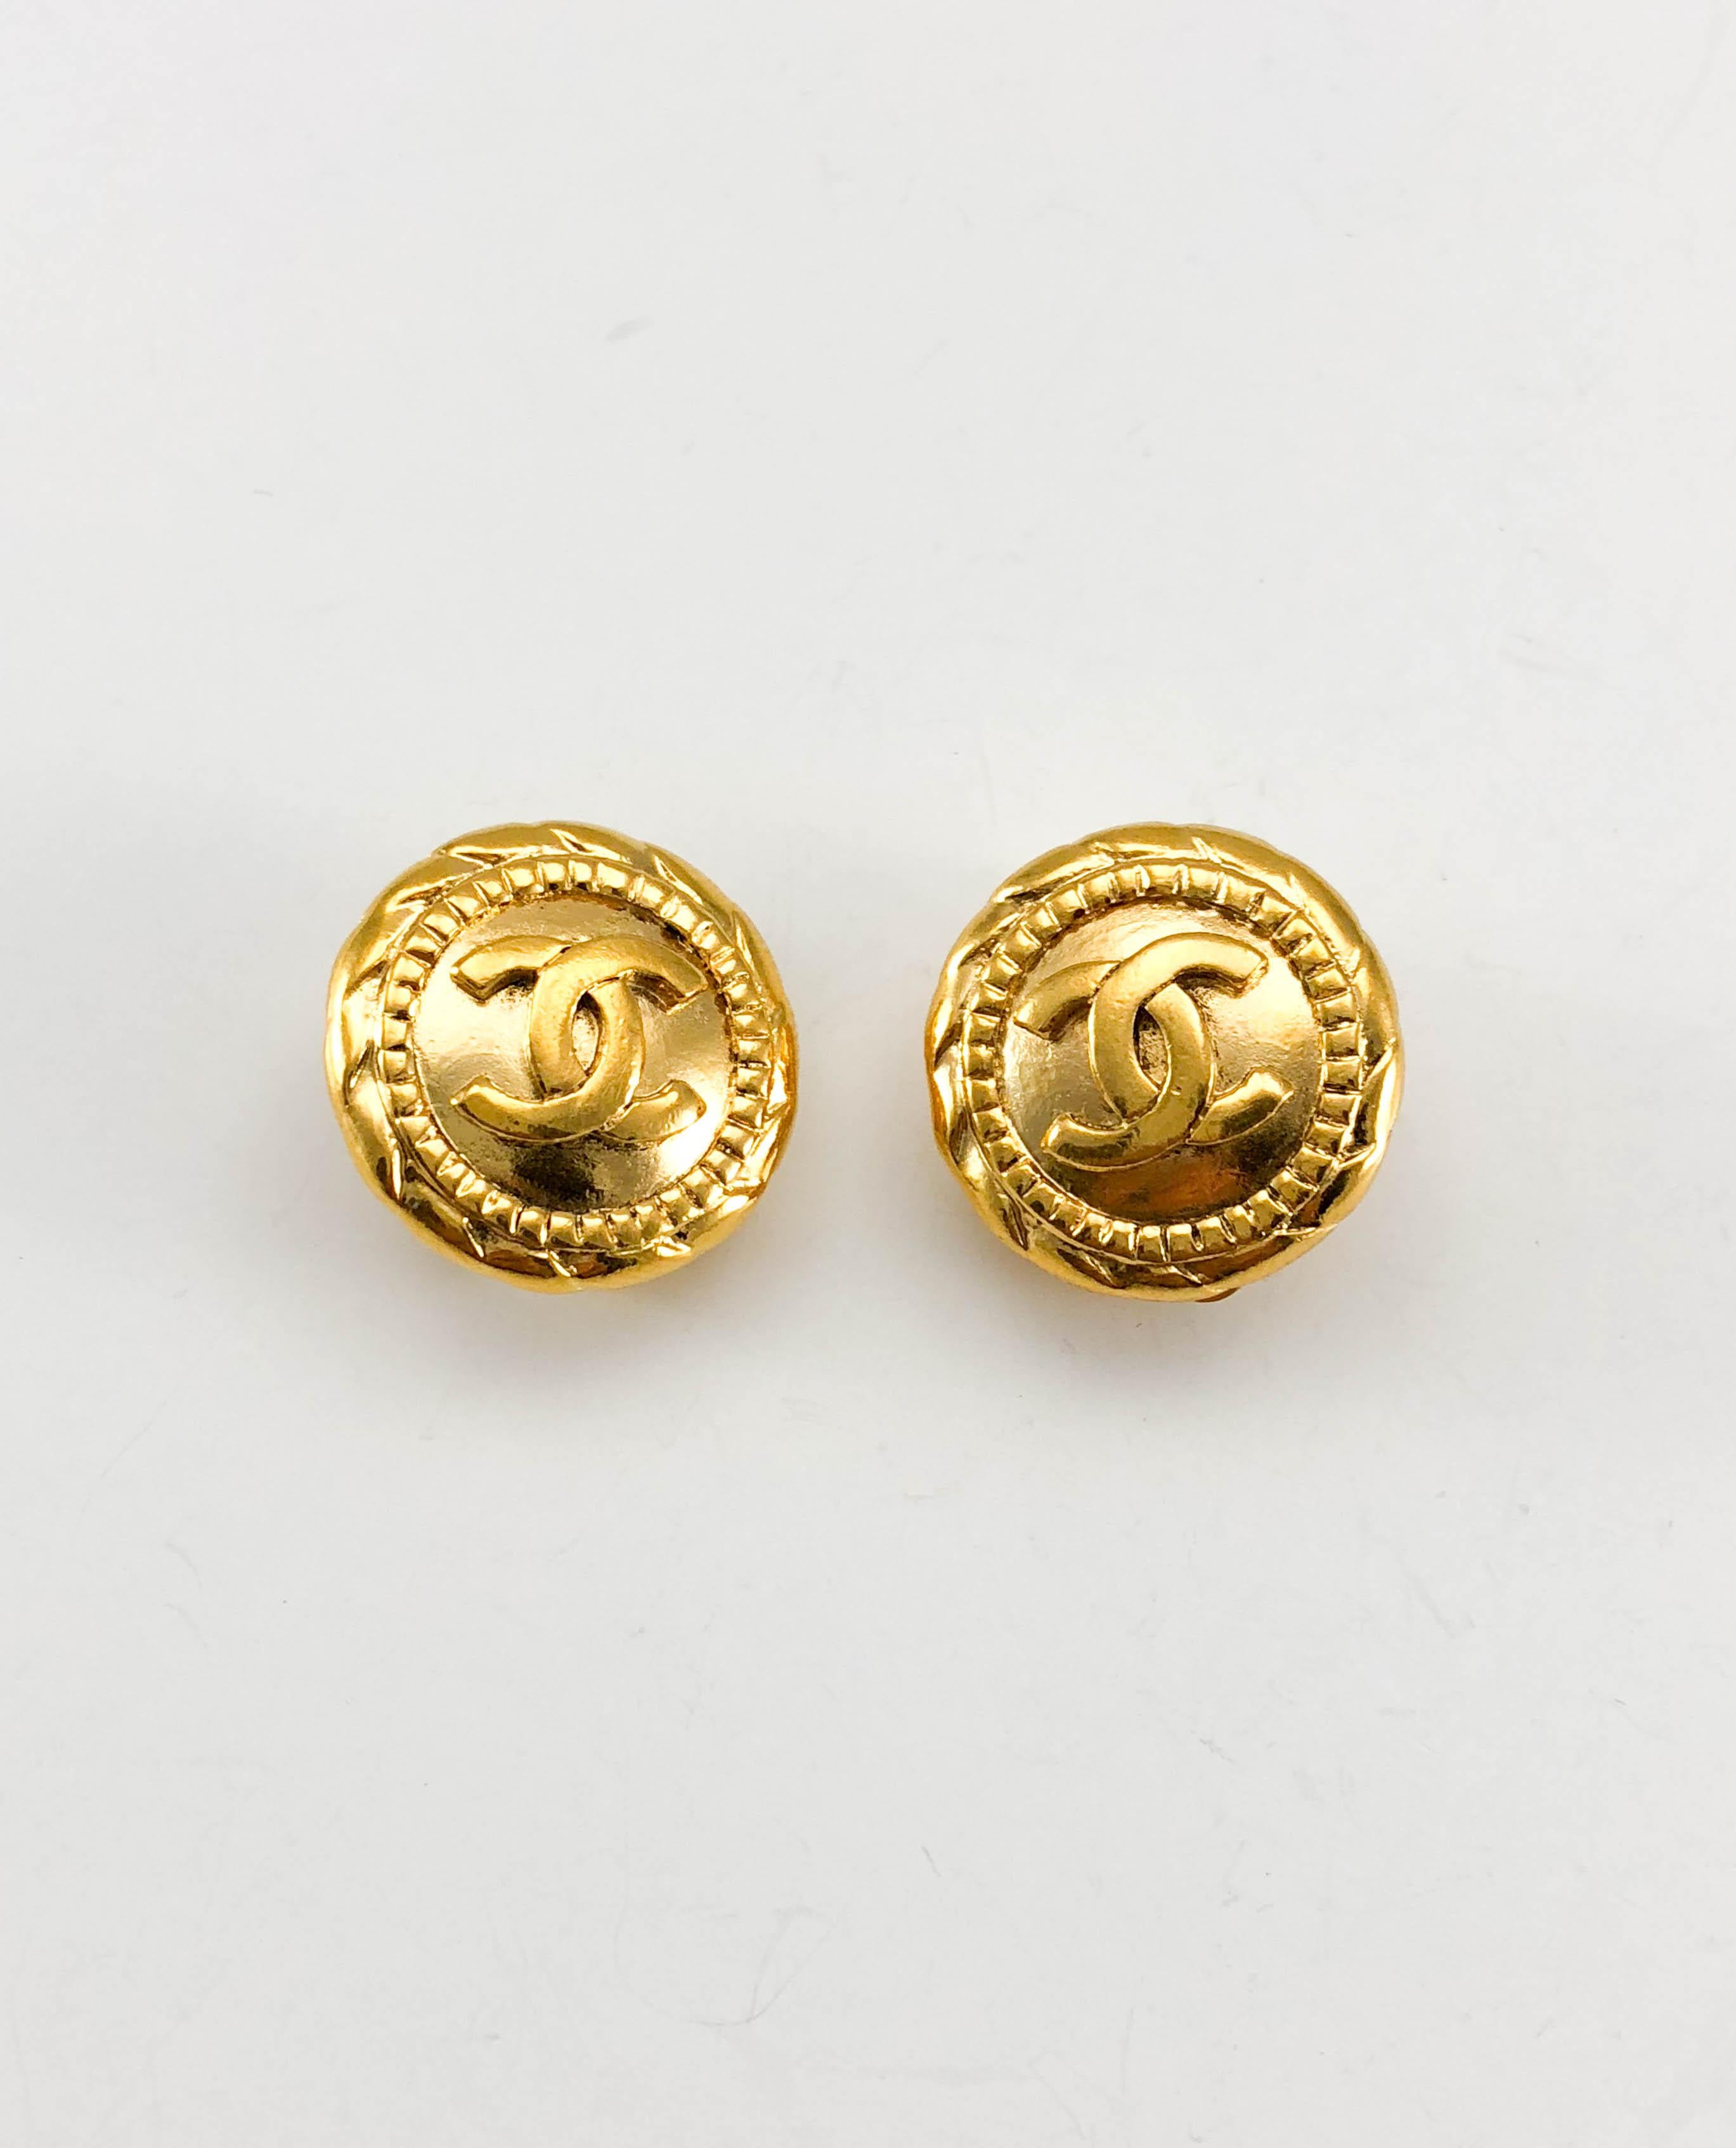 Vintage Chanel Gold-Plated Round Logo Clip-on Earrings. These beautiful Chanel earrings date back from the 1980’s. Gold-plated, the round design brings the iconic ‘CC’ logo in the centre. Chanel signed and numbered (2398) on the back. A subtle